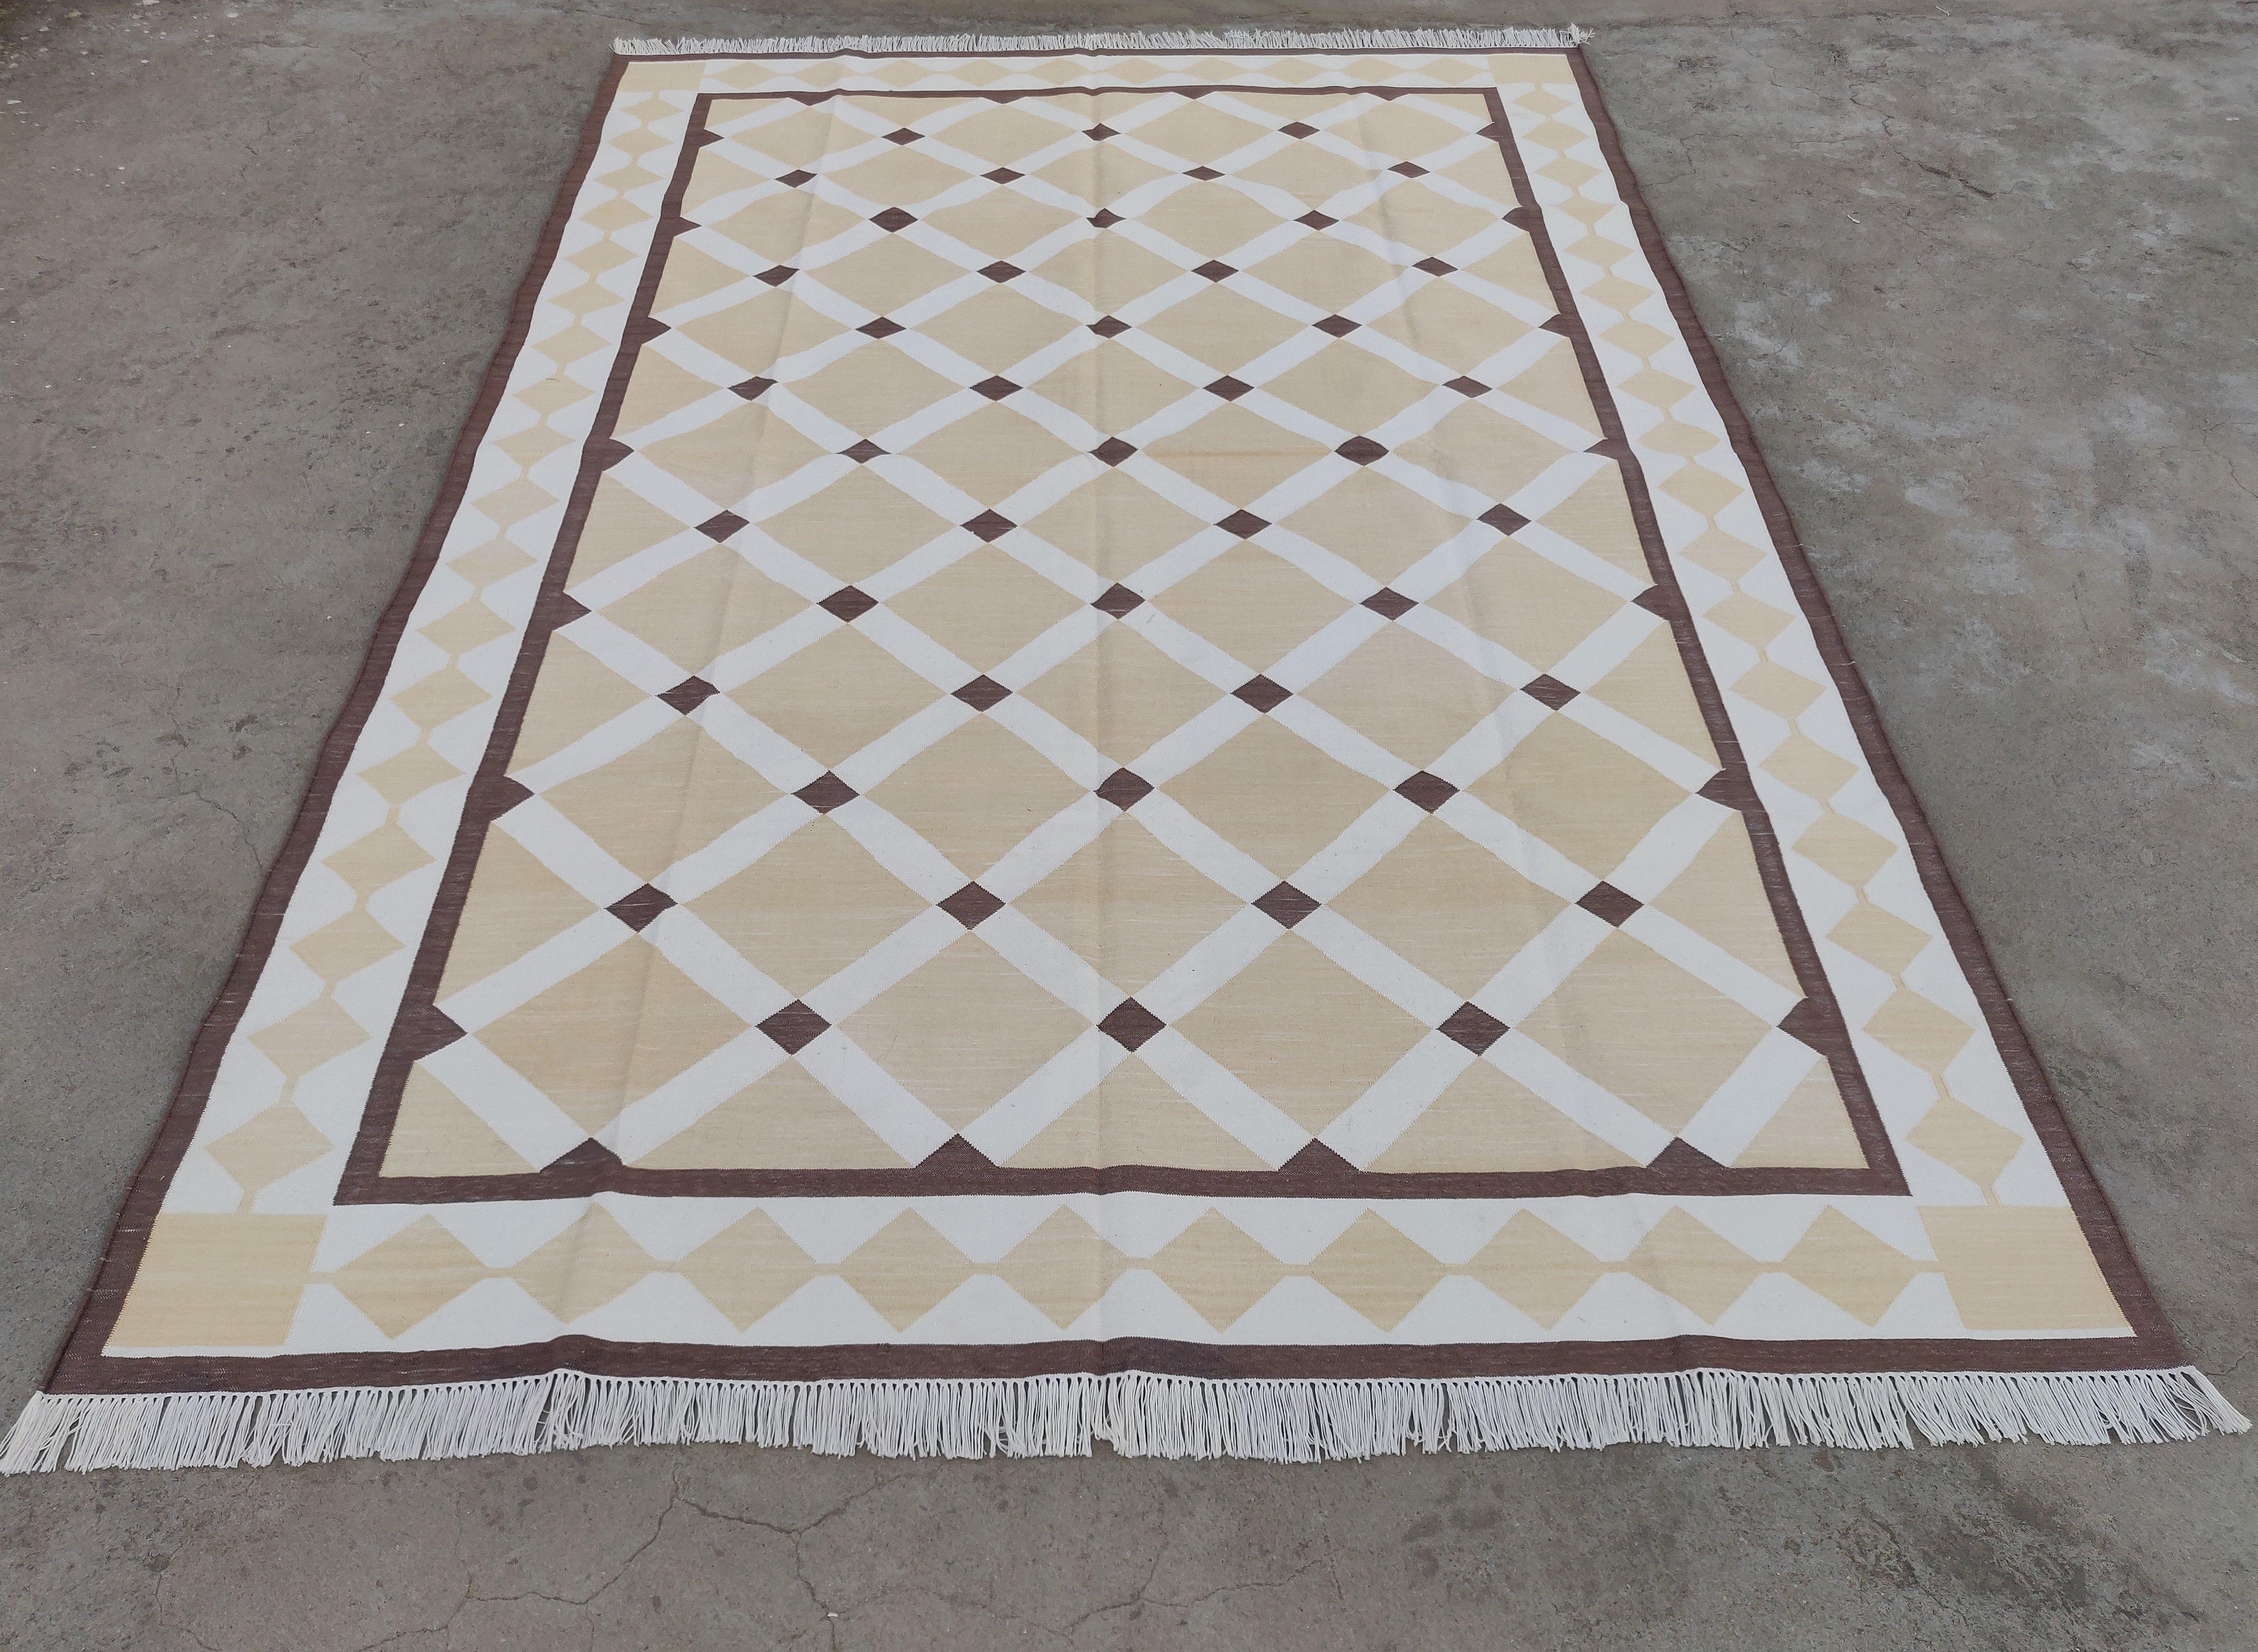 Handmade Cotton Area Flat Weave Rug, 6x9 Beige & Brown Geometric Indian Dhurrie In New Condition For Sale In Jaipur, IN